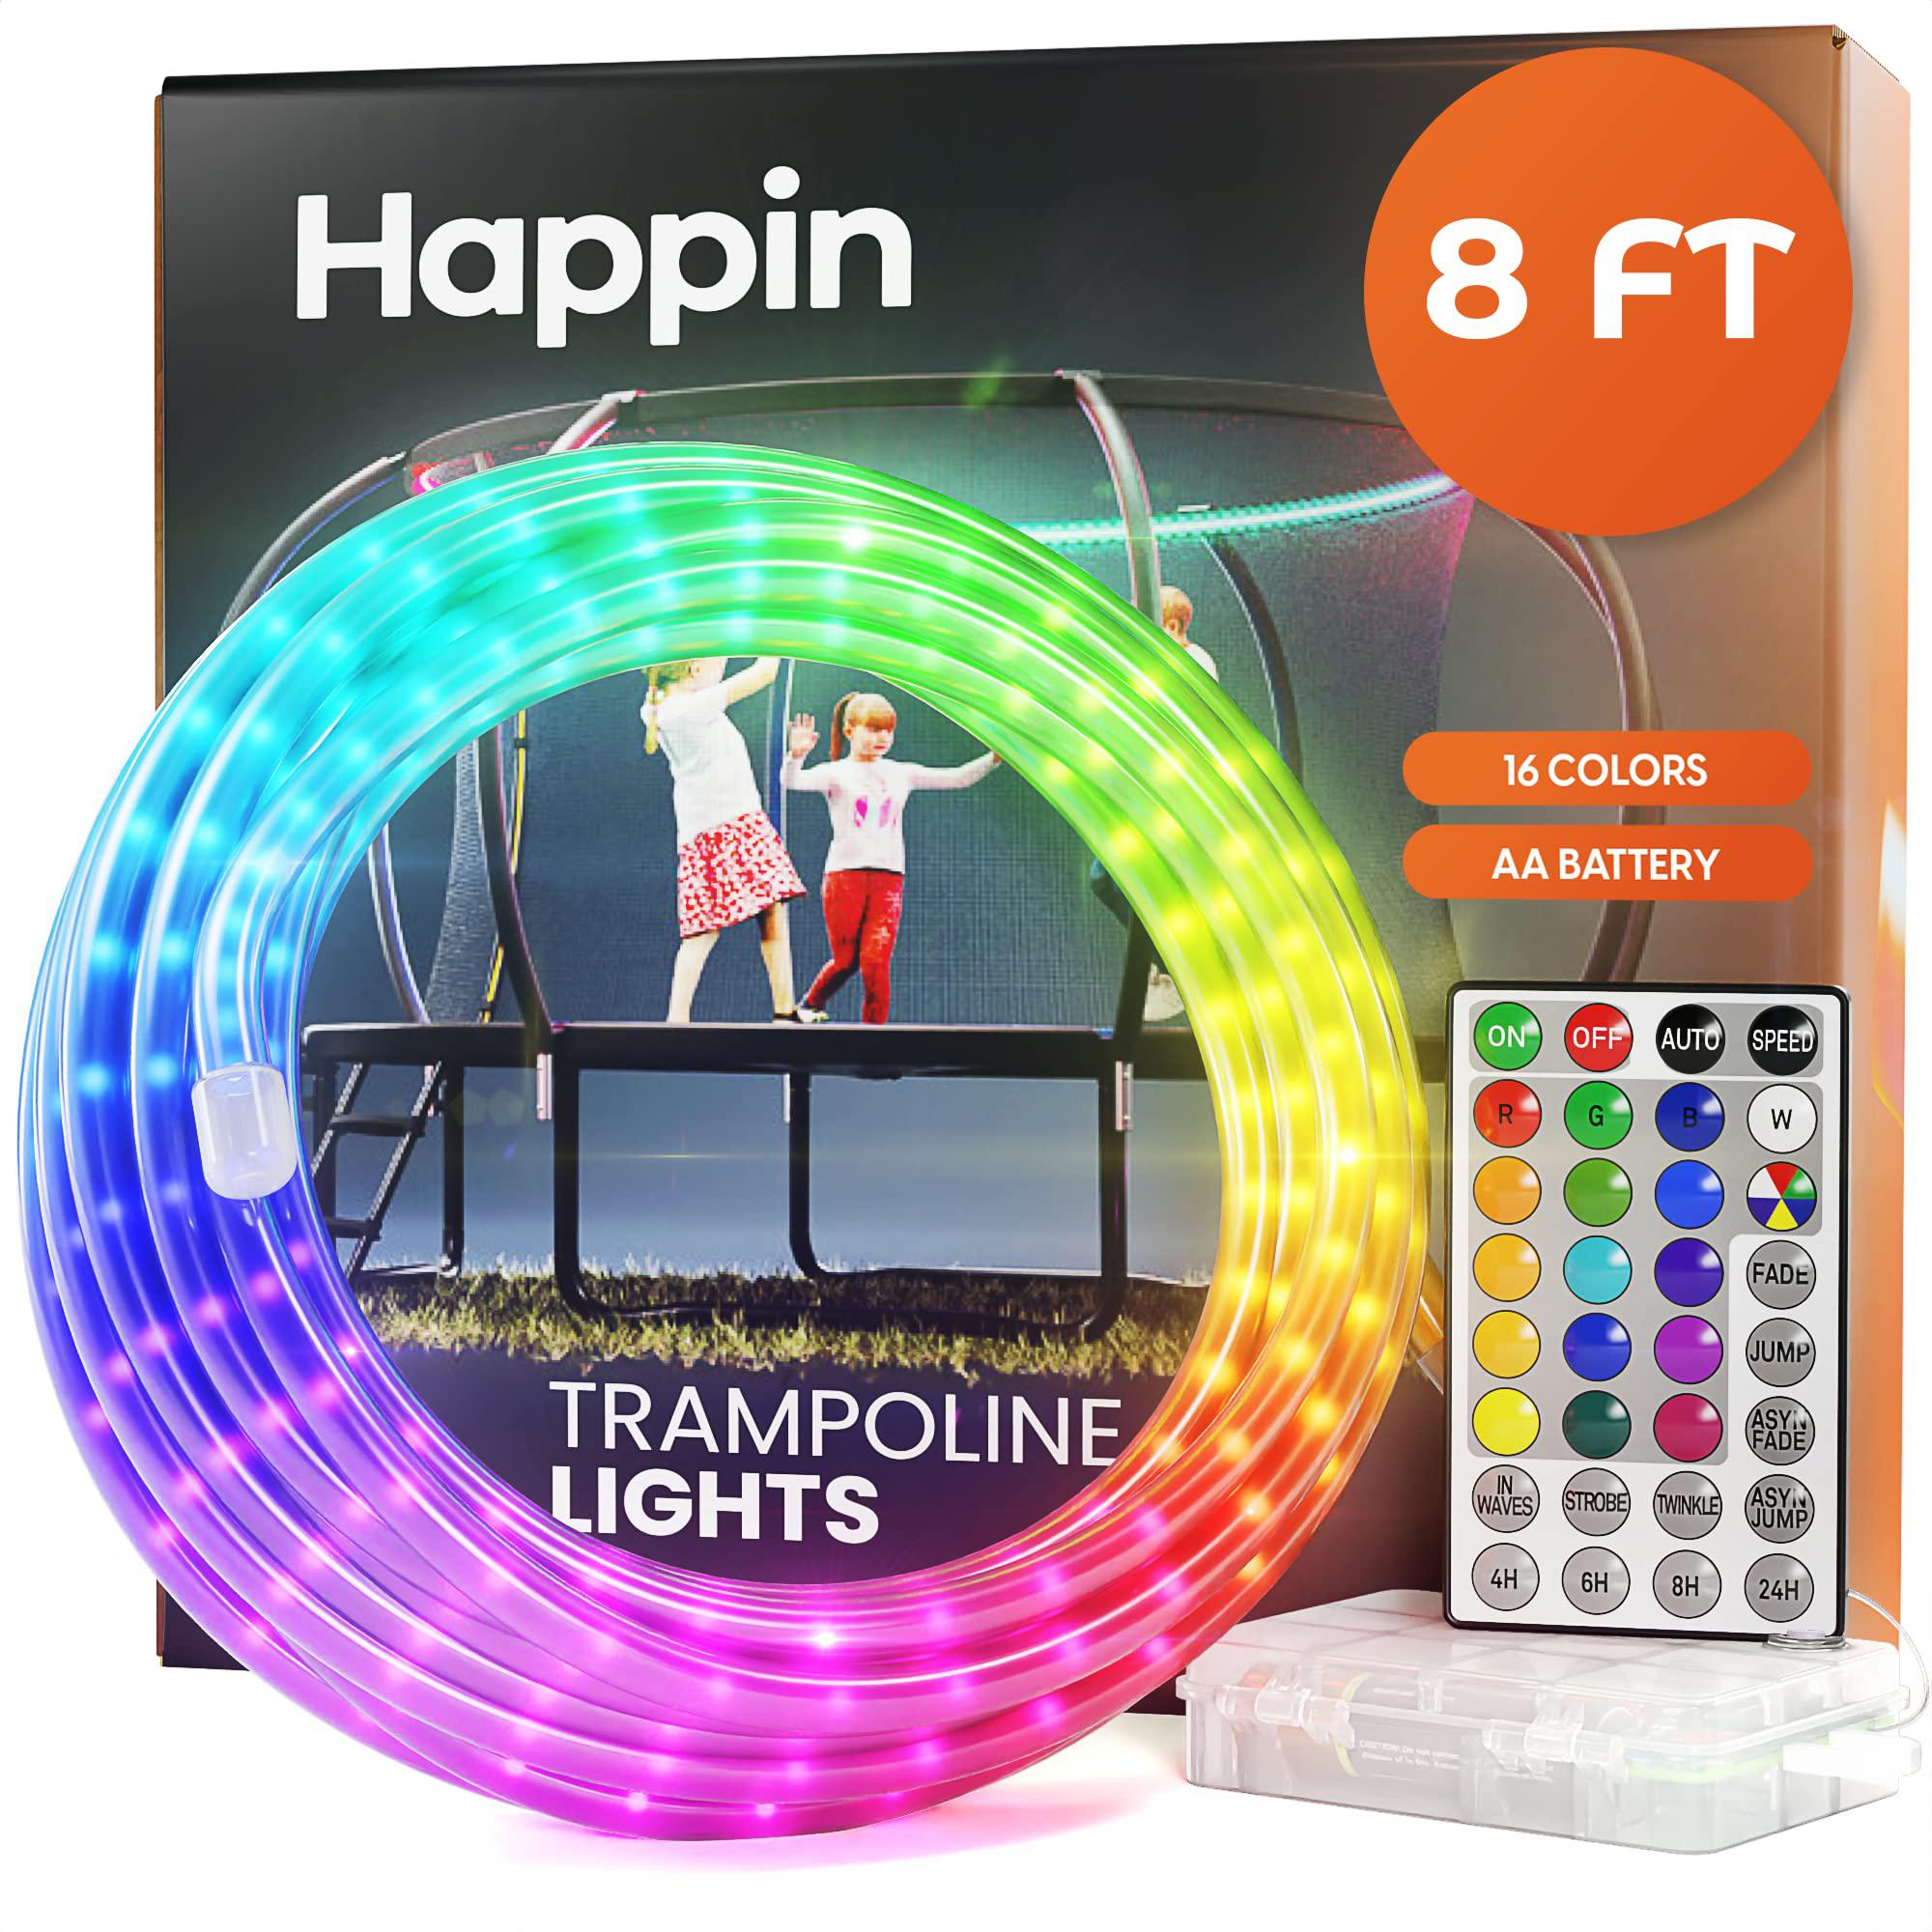 happin led trampoline lights with remote control, 16 colors and 4 modes, waterproof lights for trampoline for fun outdoor pla